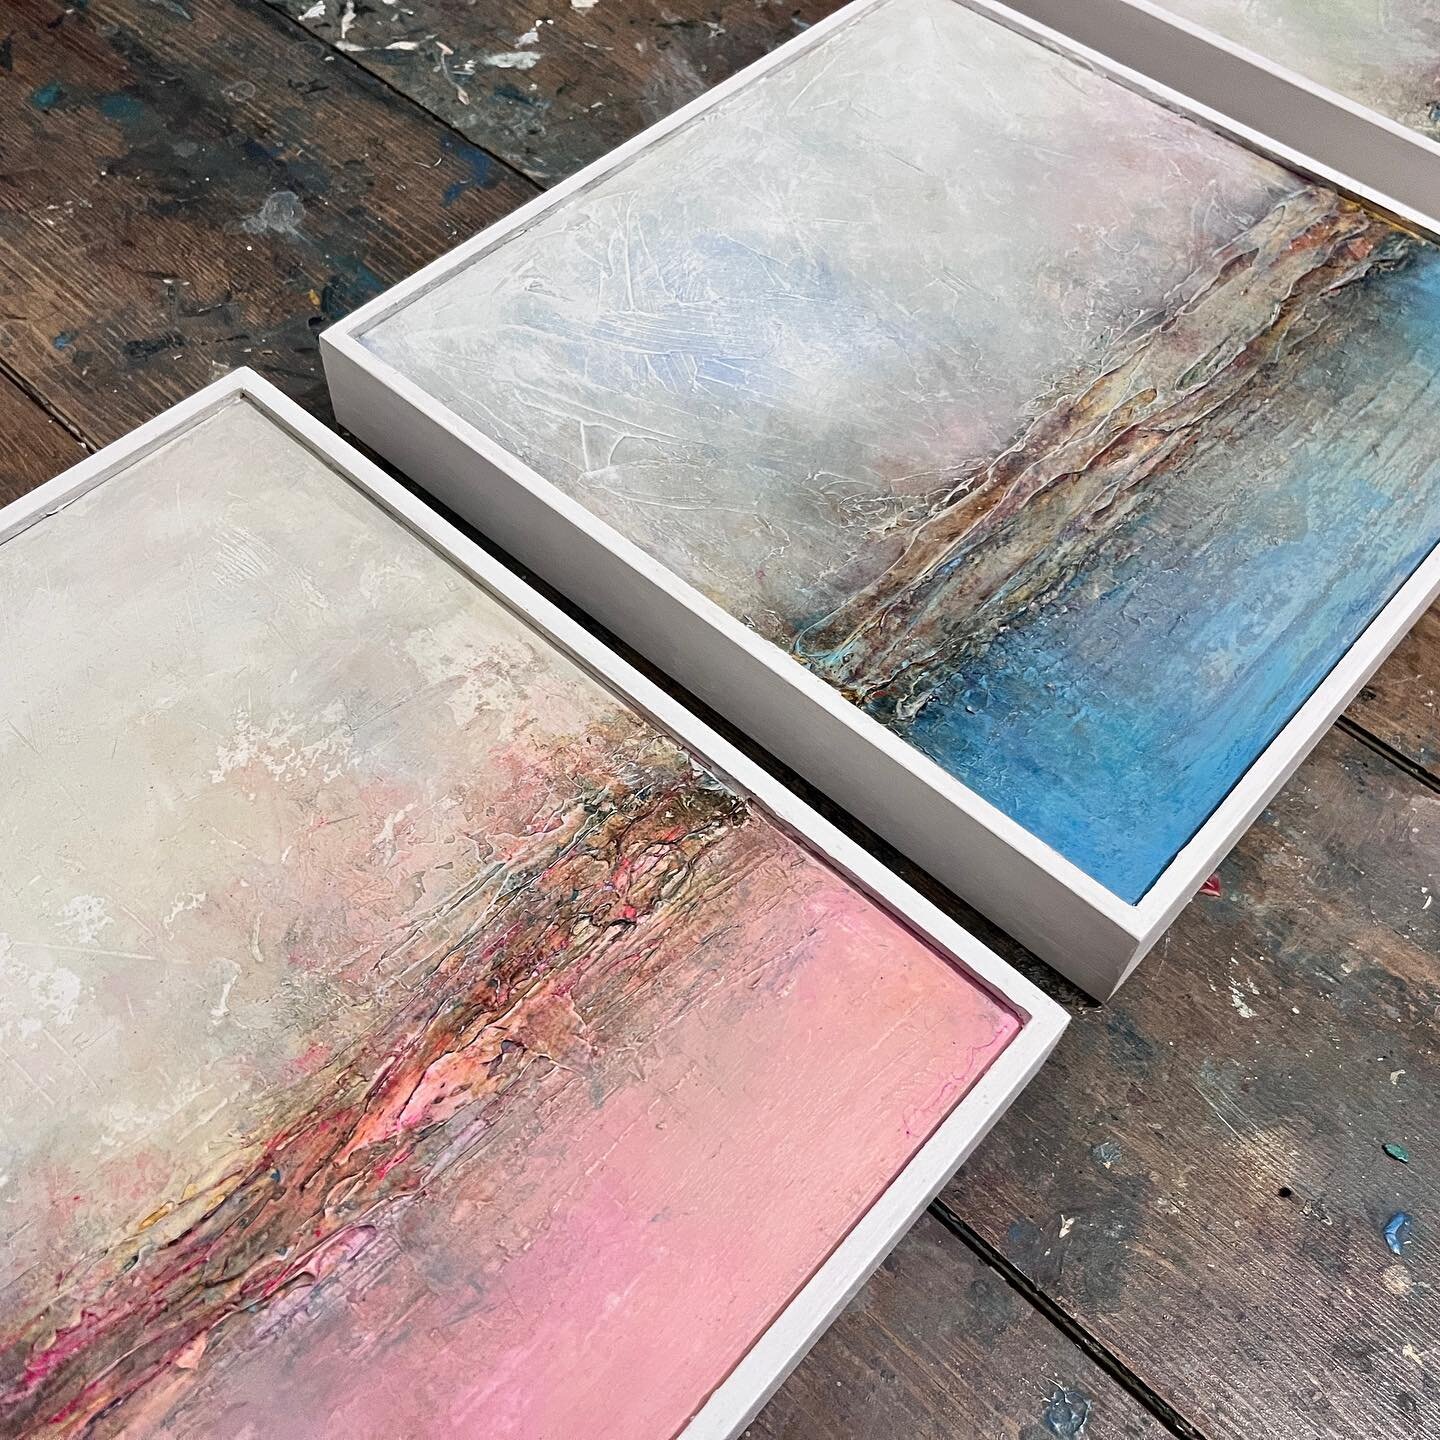 I love building up a collection of paintings and seeing how they work together with colour and tone.

#abstract #colour #seascape #landscape #paintings #art #contemporarypaintings #nature #artist #irishart #horizonart #colour #tone #pink #blue #red #